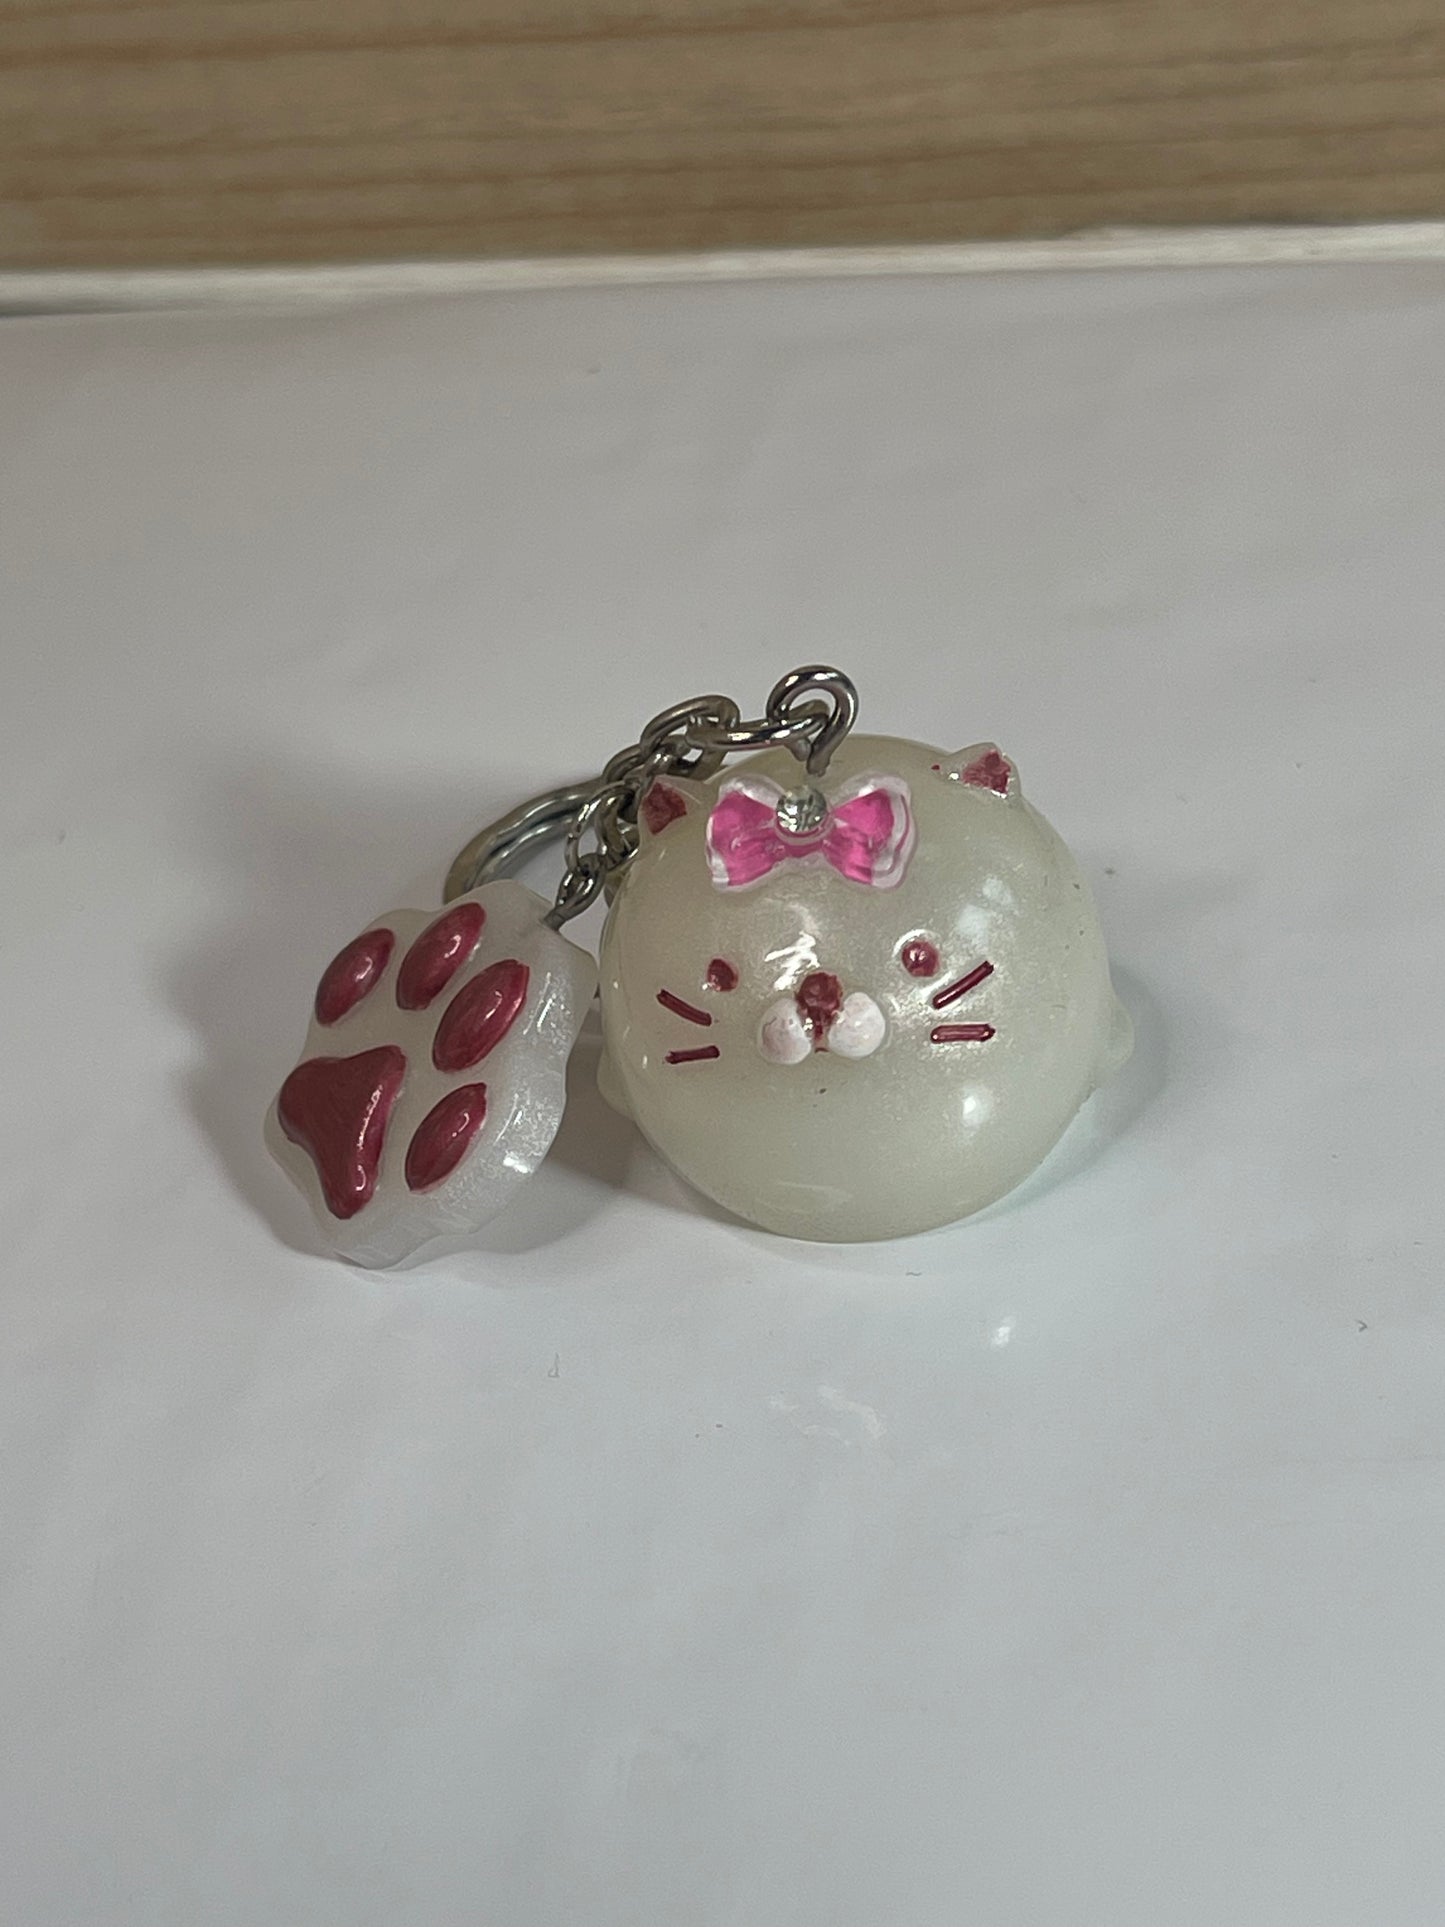 Kitty Cat with Bow and Paw Print White & Pink Keychain